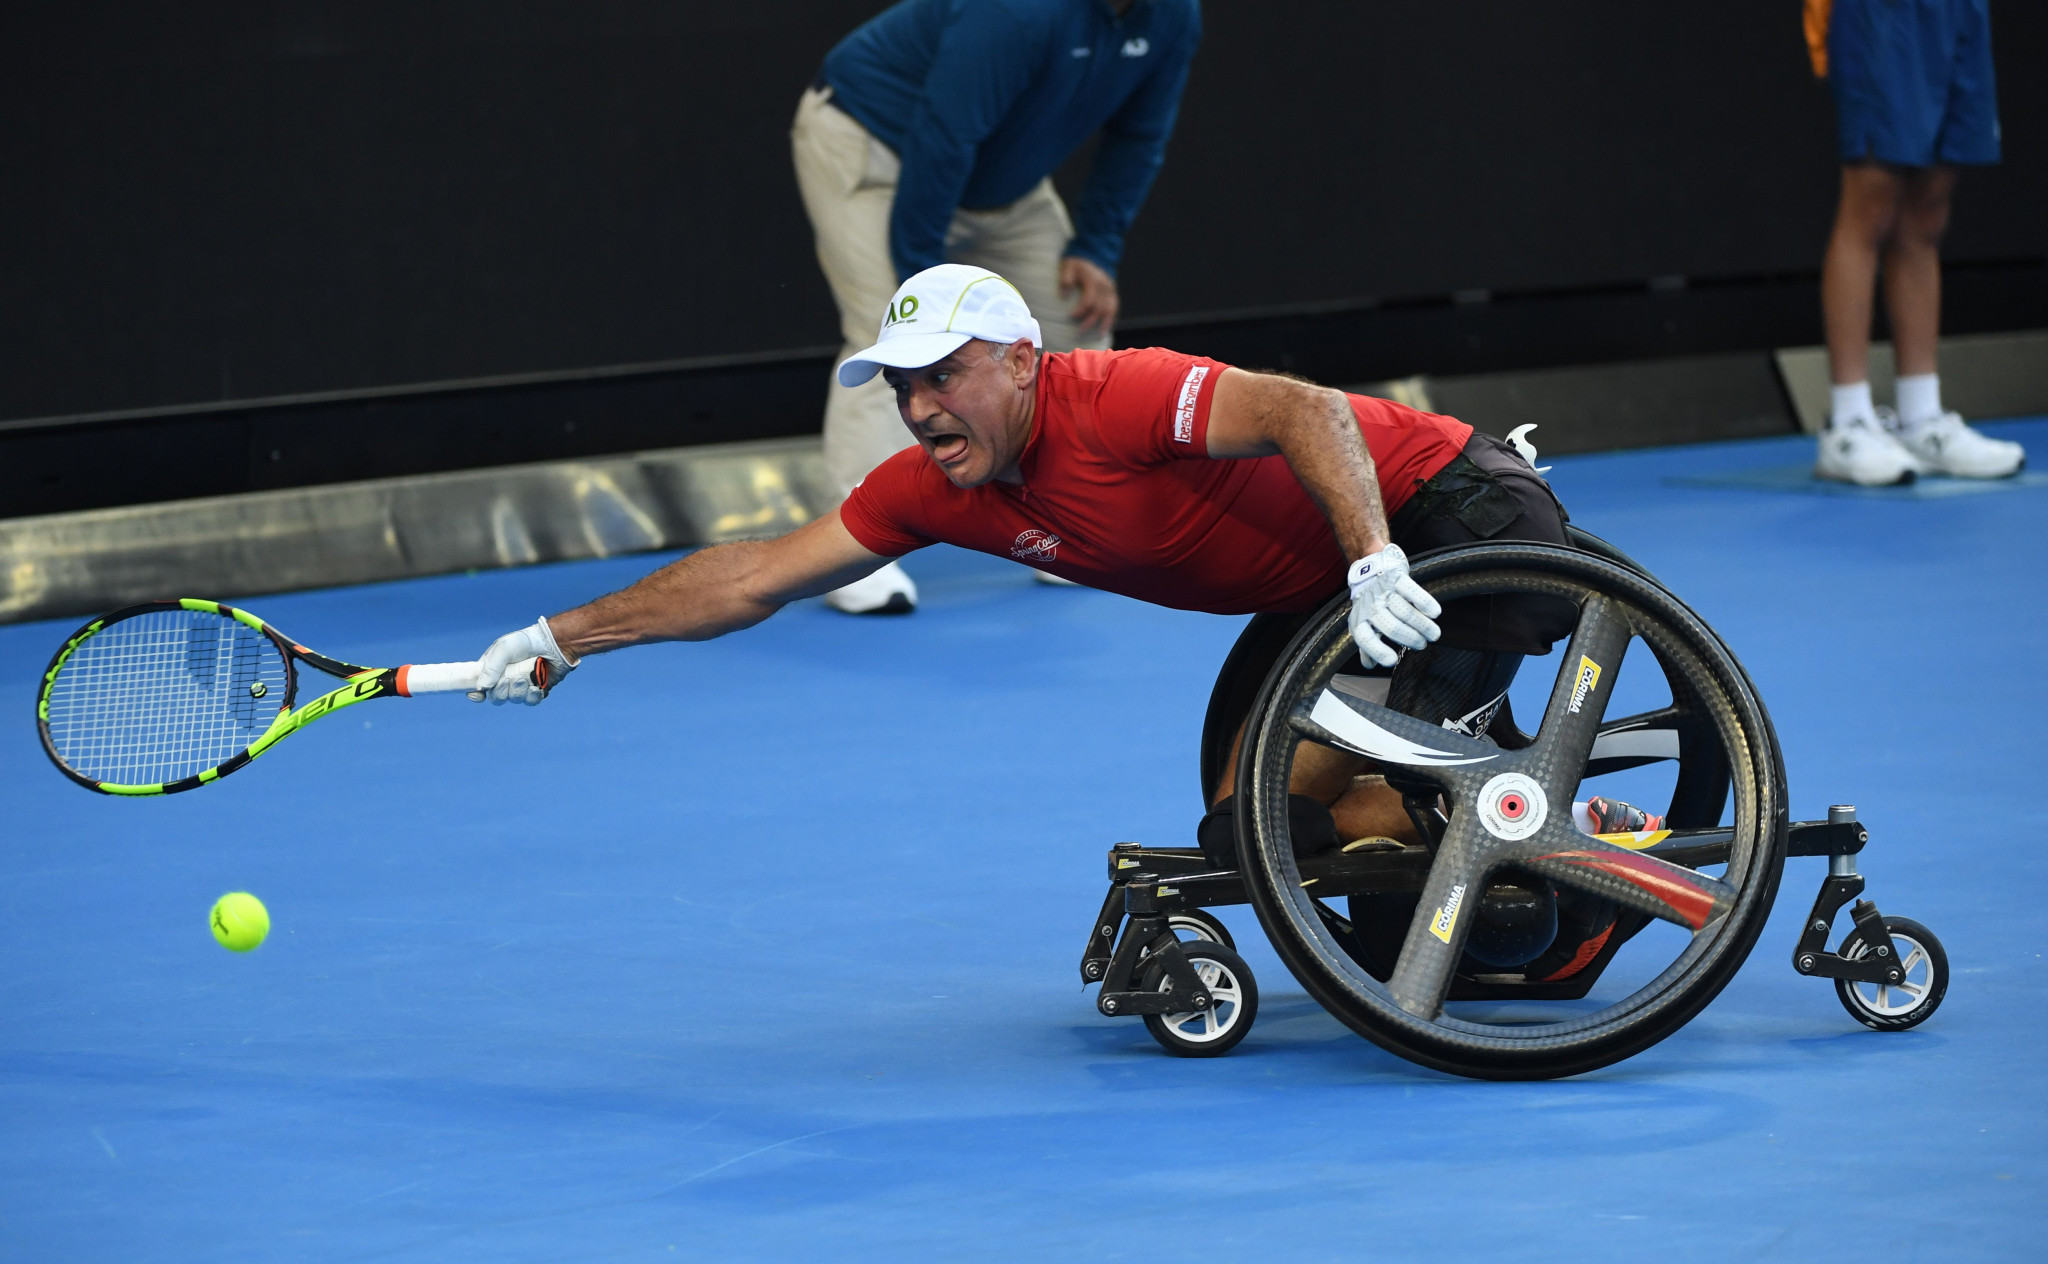 Apeldoorn to welcome 25 countries for Wheelchair Tennis World Team Cup 